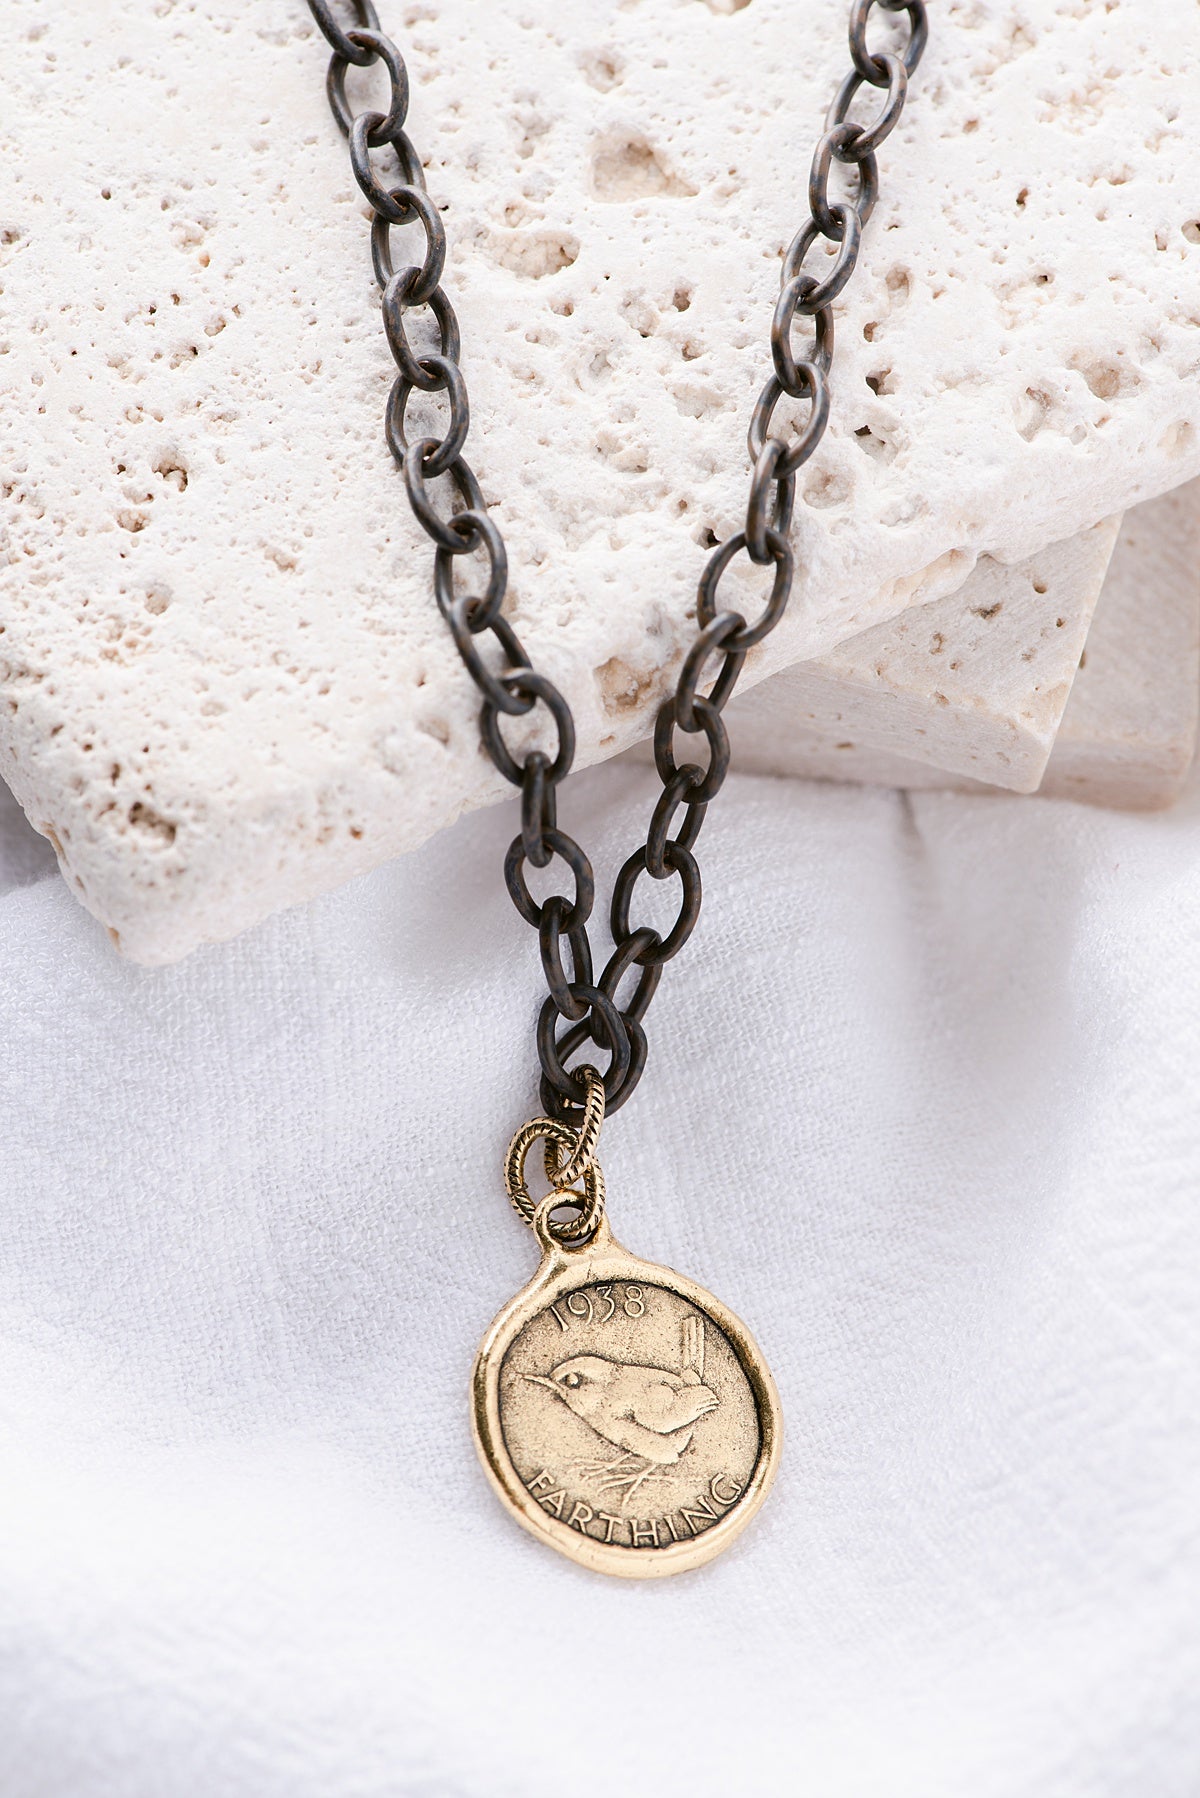 Shilling Necklace